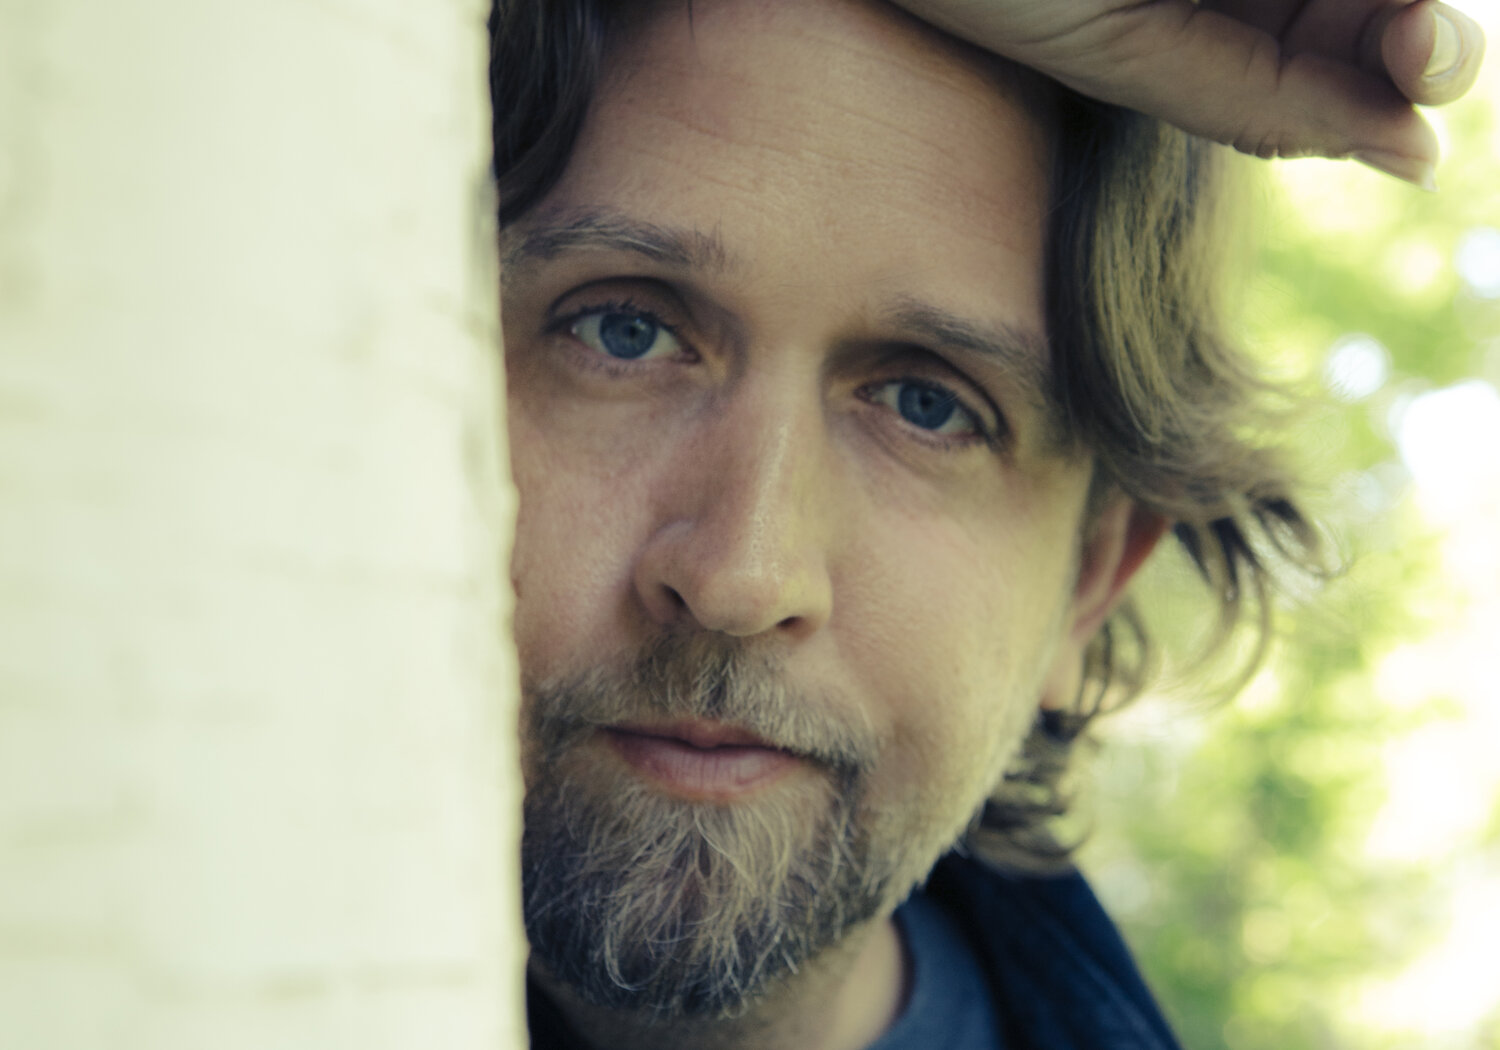 Revered as one of Texas’ greatest songer-songwriters working today, Hayes Carll returns Dec 15!